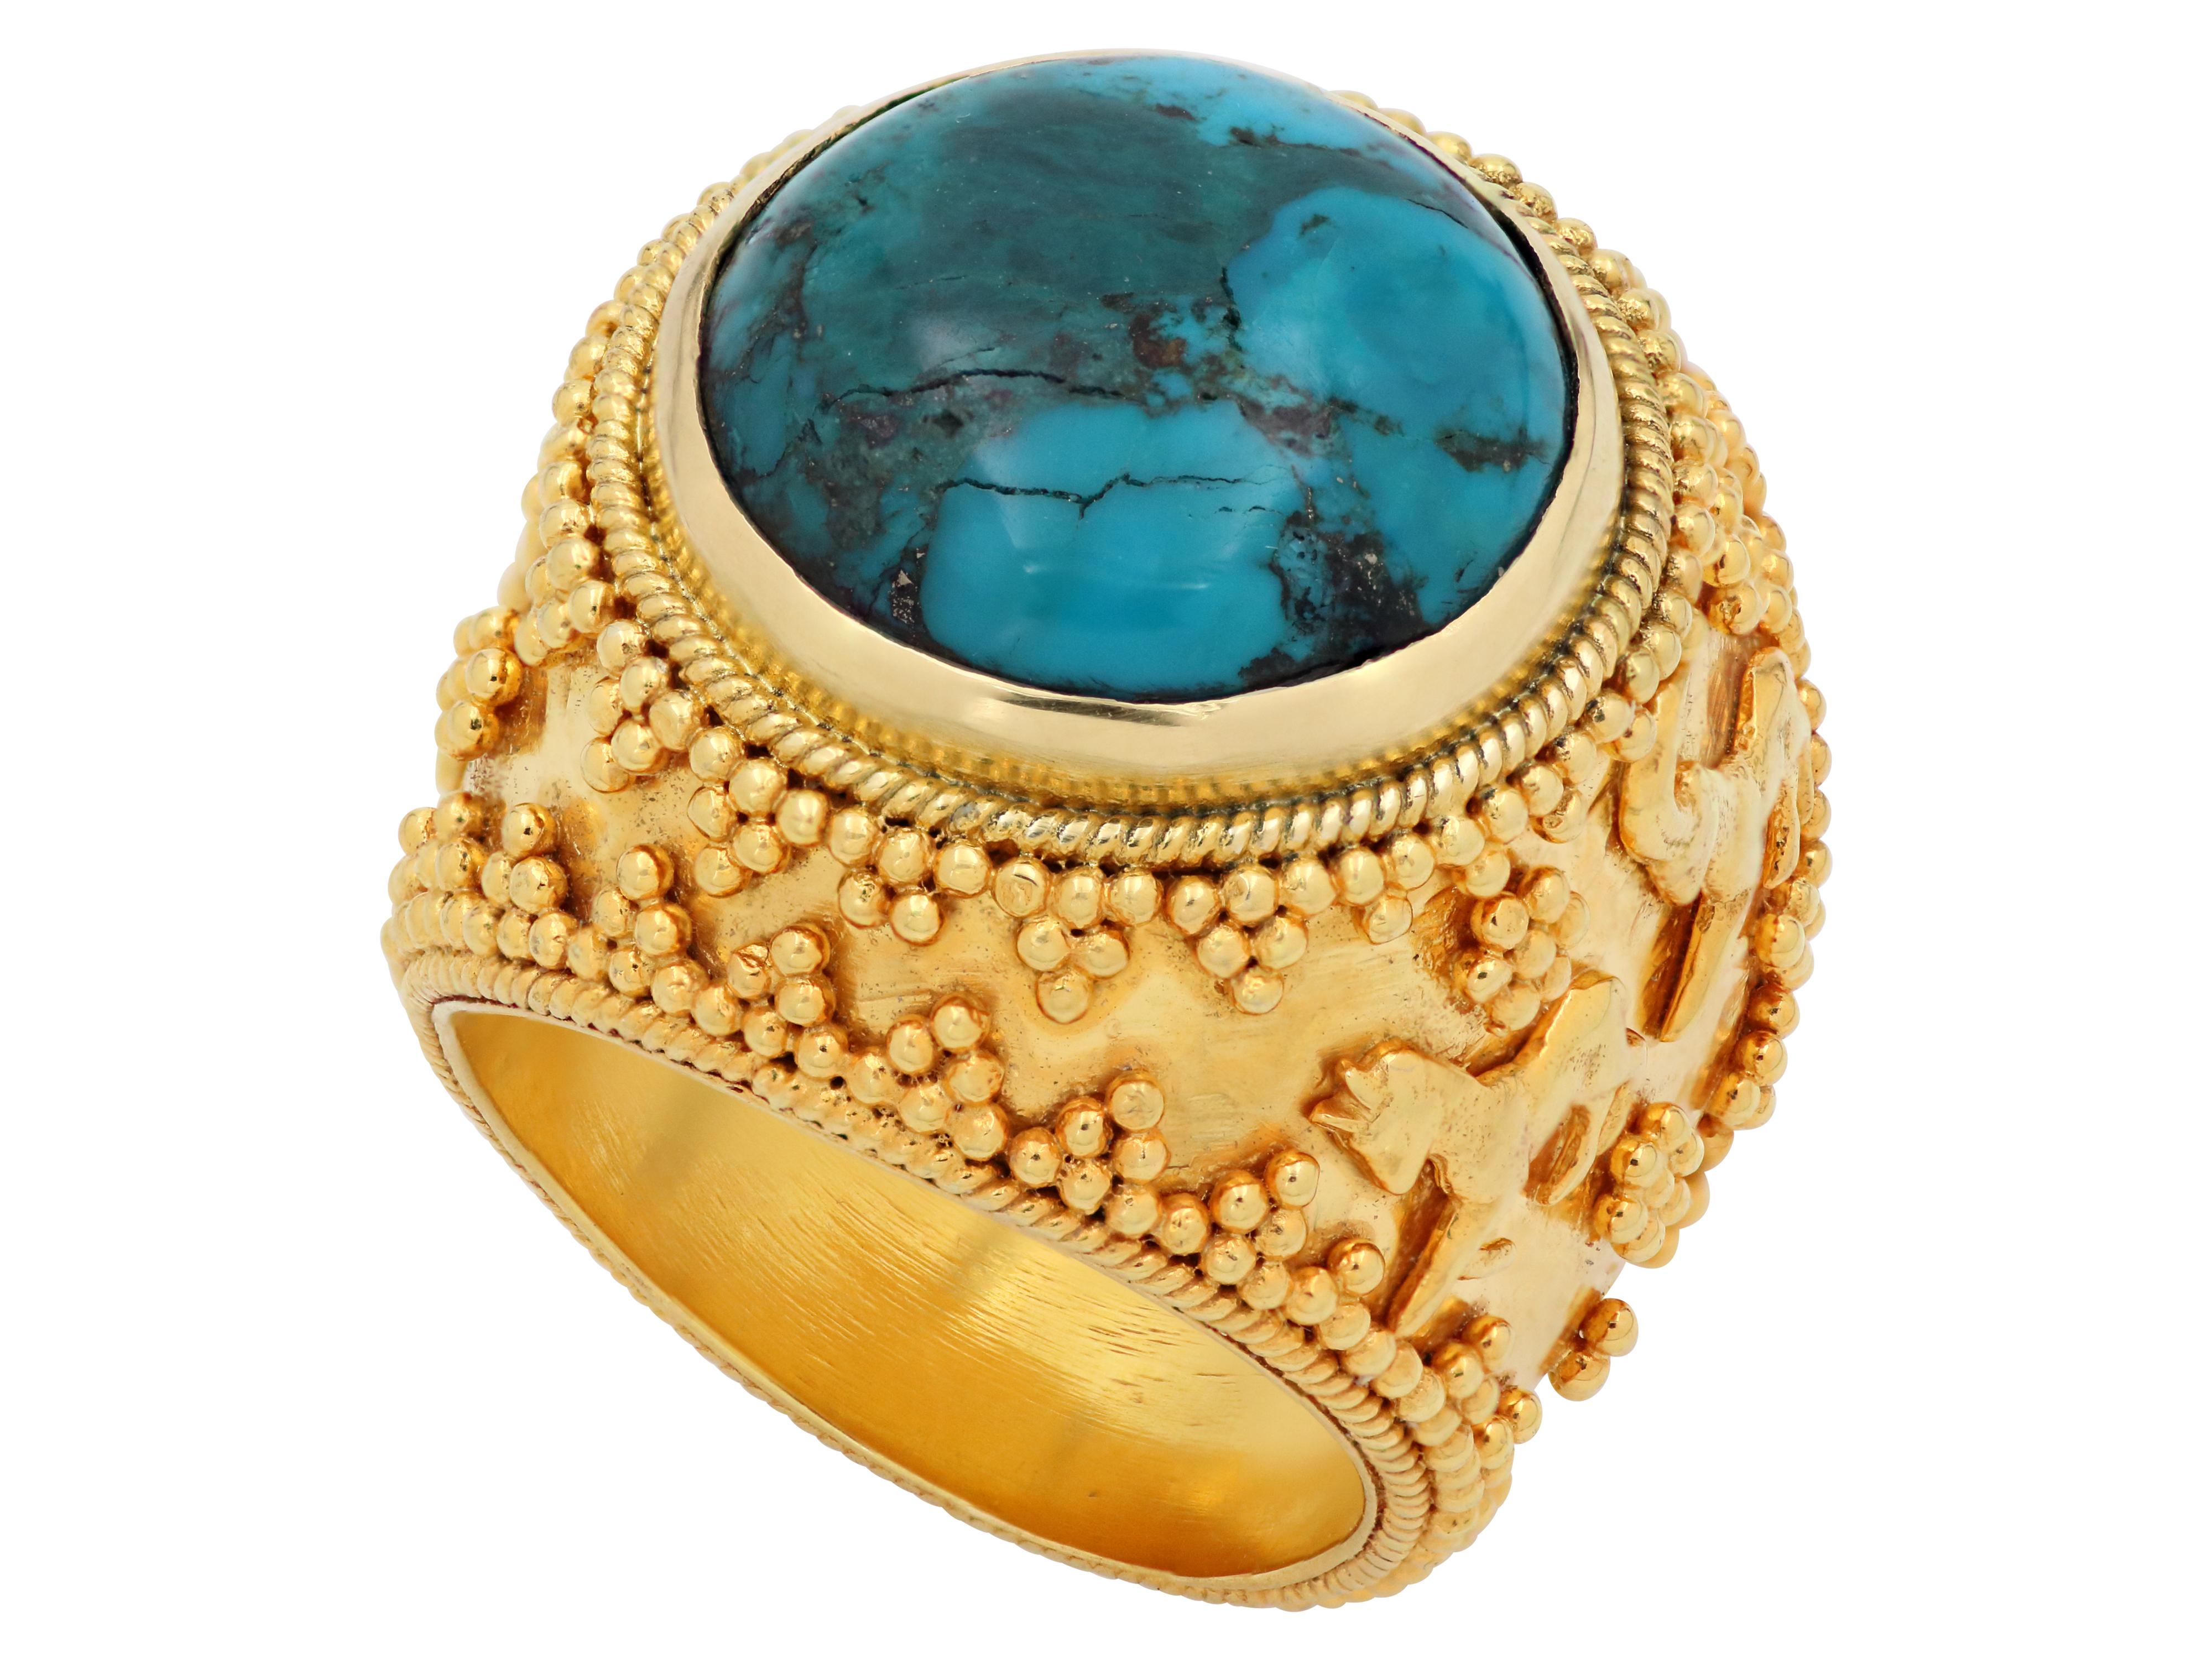 Dome ring in 18k yellow gold ring with natural round turquoise stone. Beautiful, strong and detail setting with over 400 round gold beats complete this work of art masterpiece all the way around. The side addition of the Kri Kri goats native to the